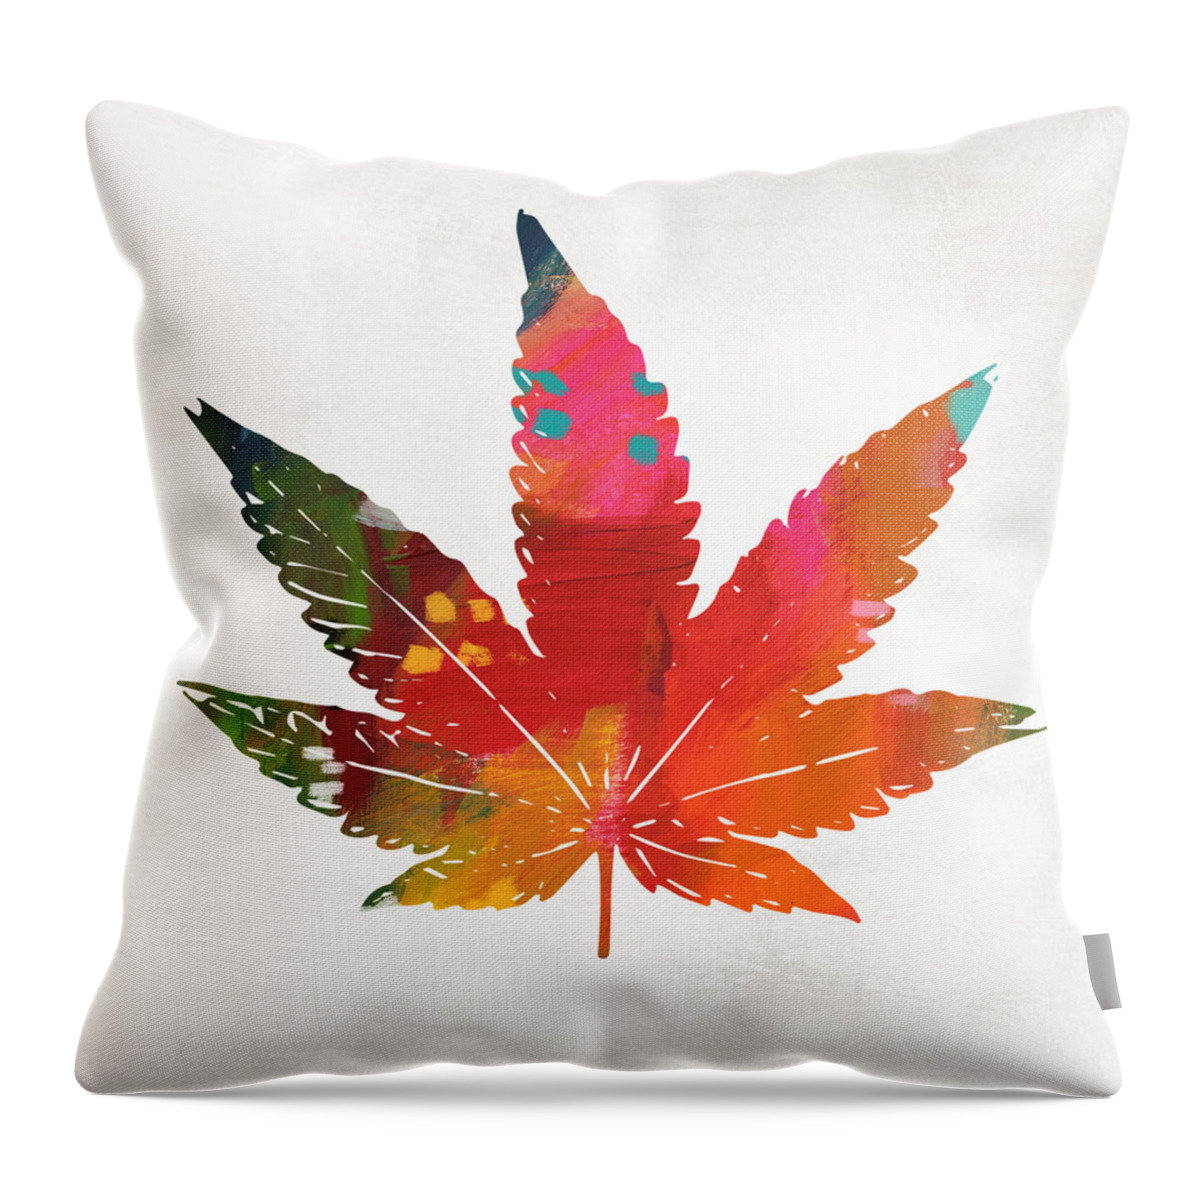 Cannabis Throw Pillow featuring the mixed media Painted Cannabis Leaf 1- Art by Linda Woods by Linda Woods